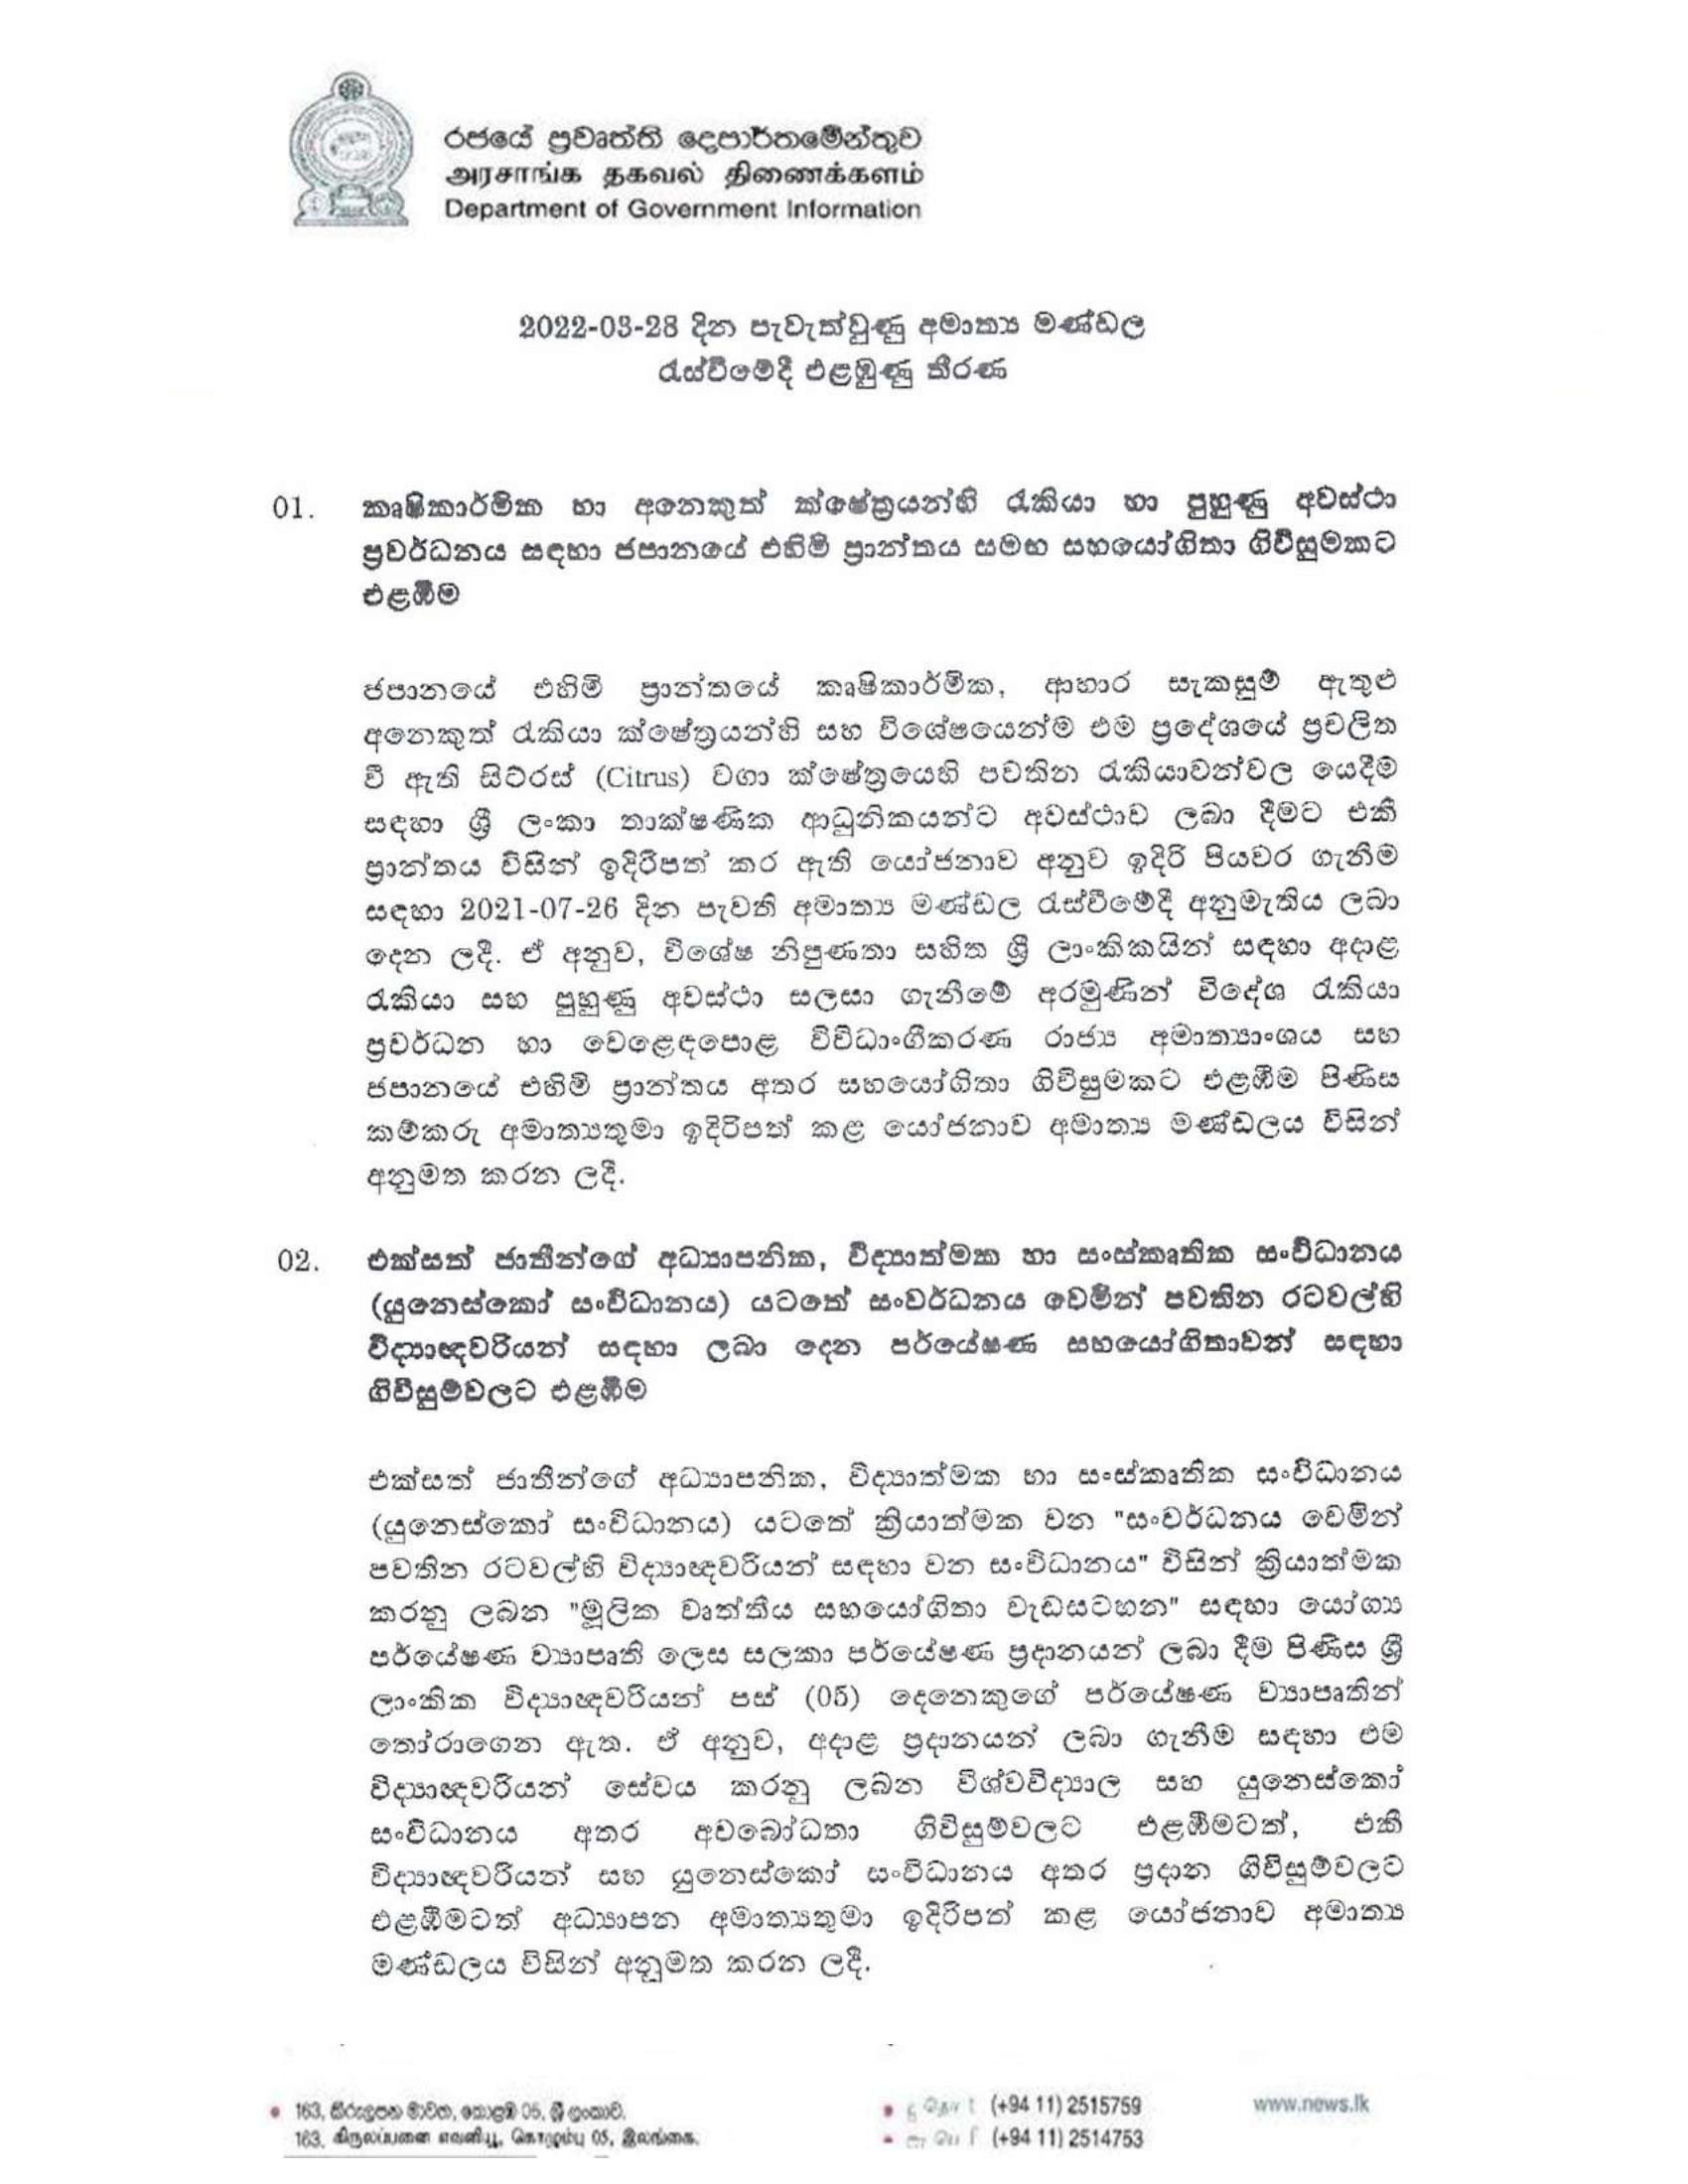 Cabinet Decision on 28.03.2022 1